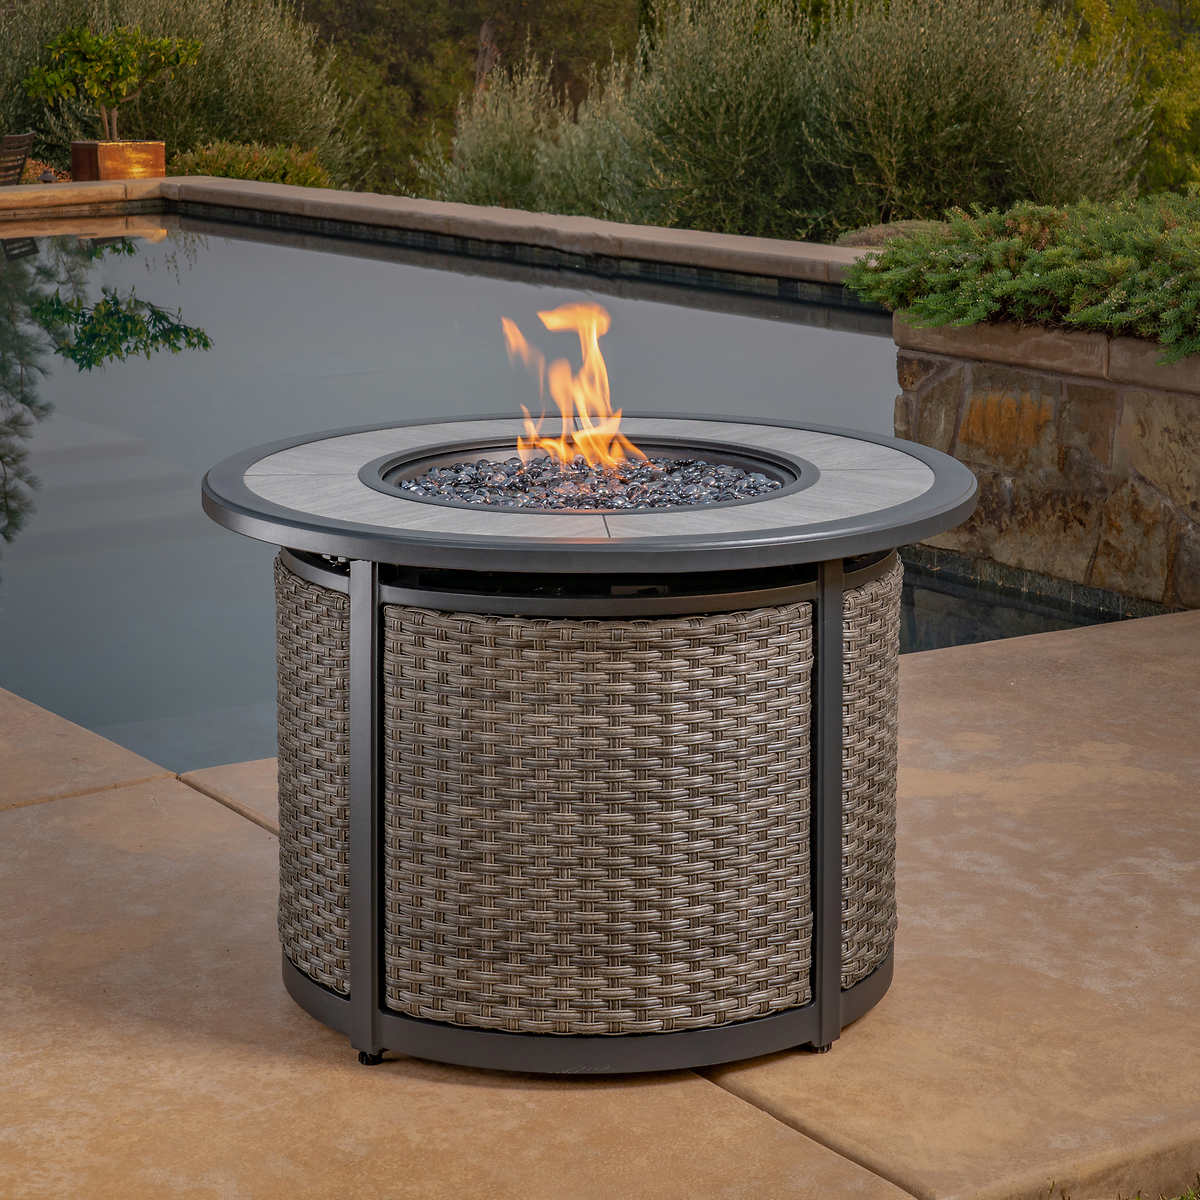 Madison Fire Pit Table Costco, Fire Pit Emergency Shut Off